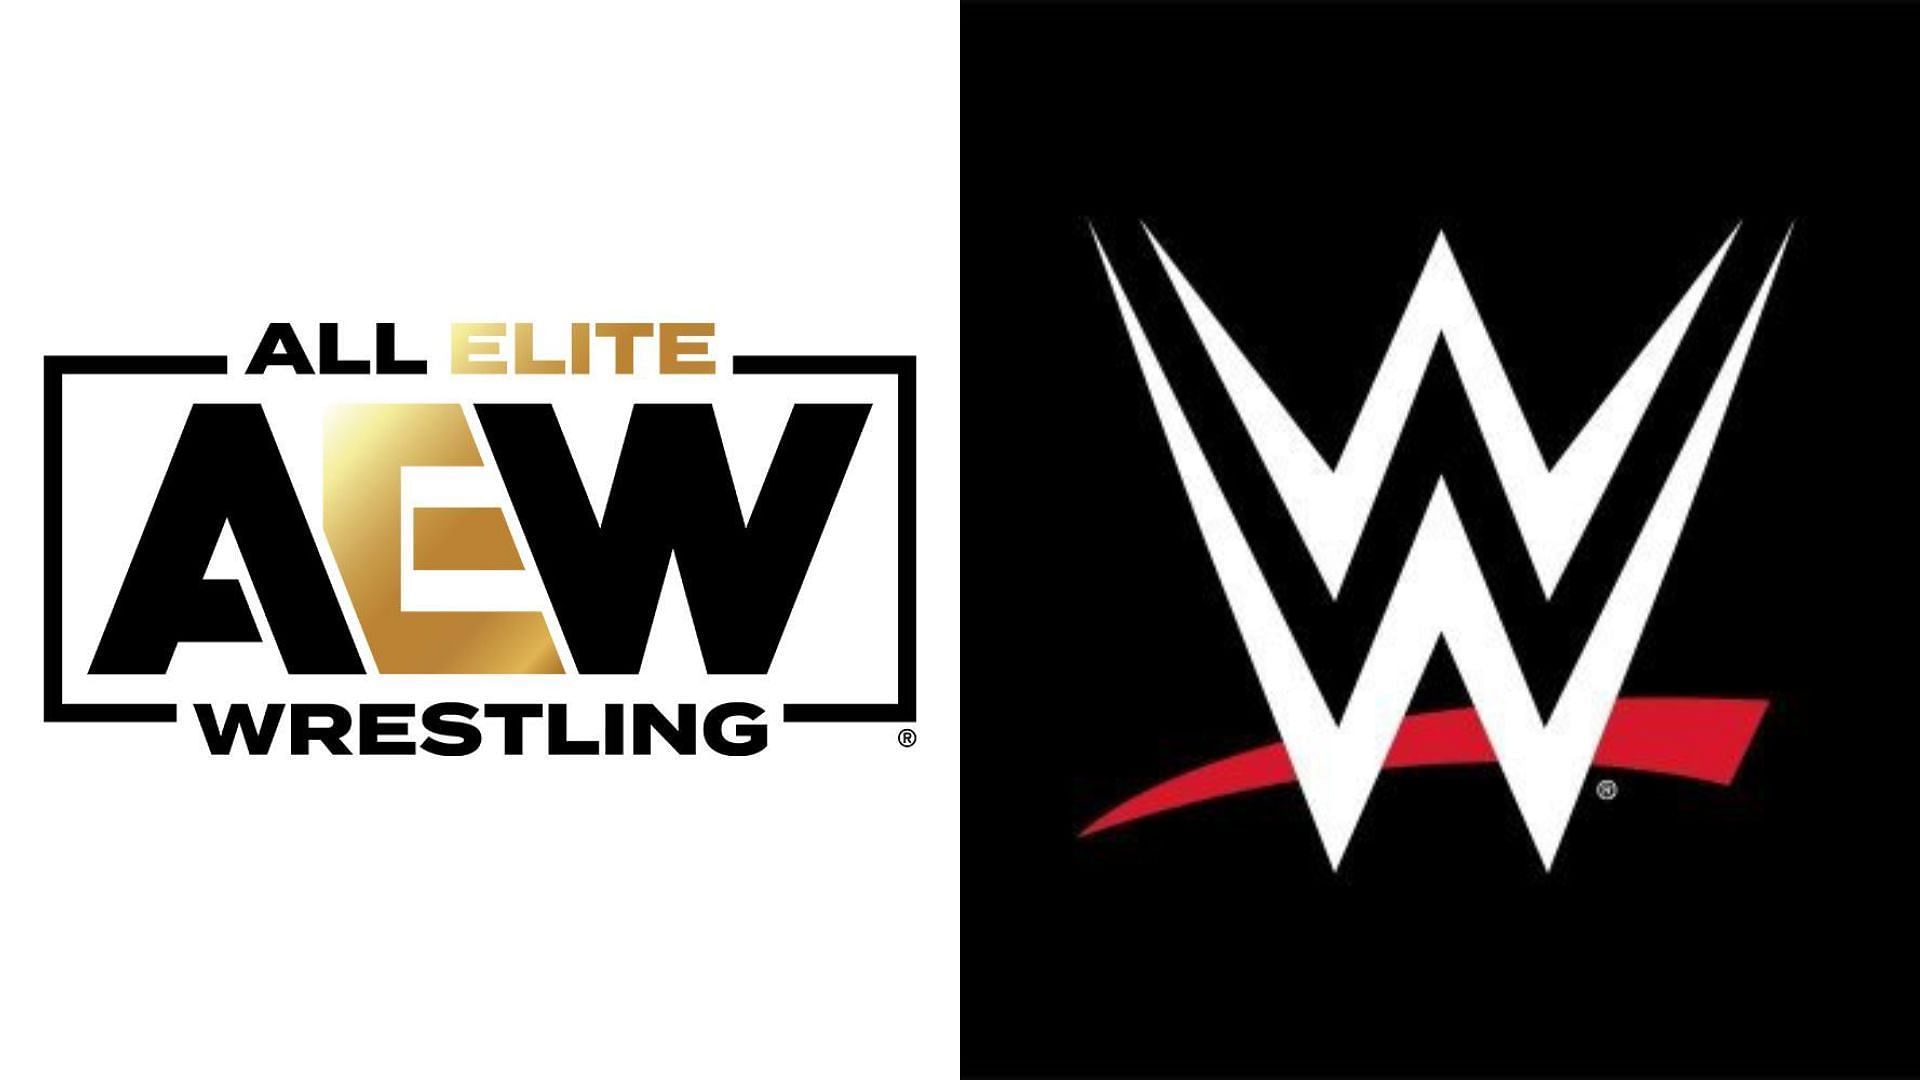 AEW and WWE are mega-players in the wrestling industry. [Photos courtesy of their respective official Twitter accounts]